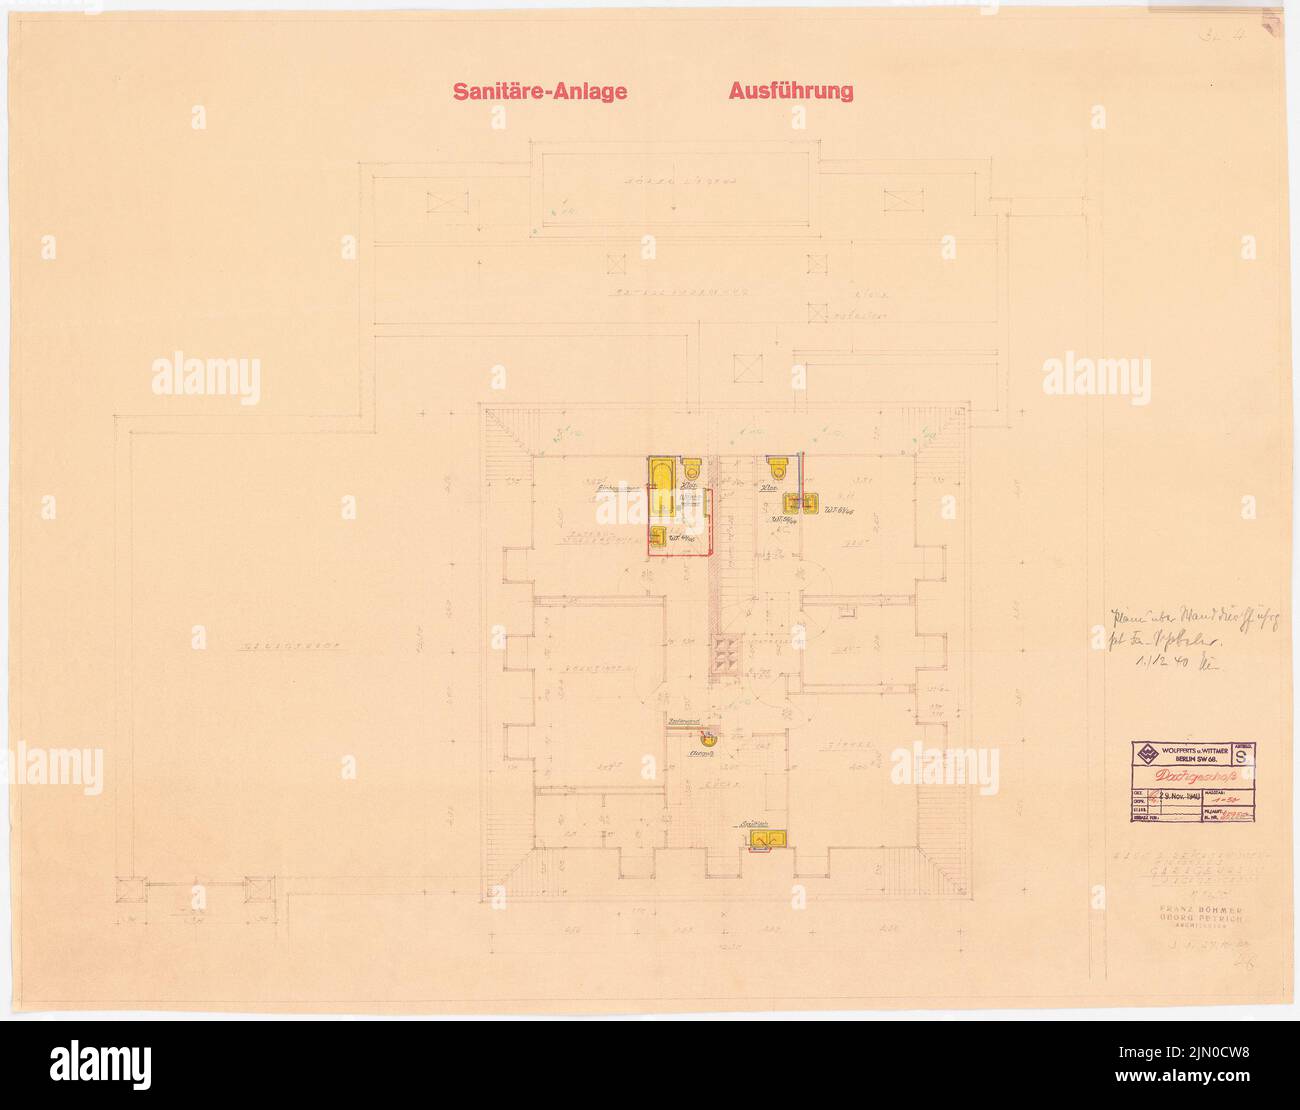 Böhmer Franz (1907-1943), official apartment of the Reich Foreign Minister Joachim von Ribbentrop in Berlin-Mitte (November 29, 1940): Sanitary facility in the attic: floor plan 1:50. Pencil, colored pencil over a break on paper, 61.9 x 78.8 cm (including scan edges) Böhmer & Petrich : Dienstwohnung des Reichsaußenministers Joachim von Ribbentrop, Berlin-Mitte. Umbau Stock Photo